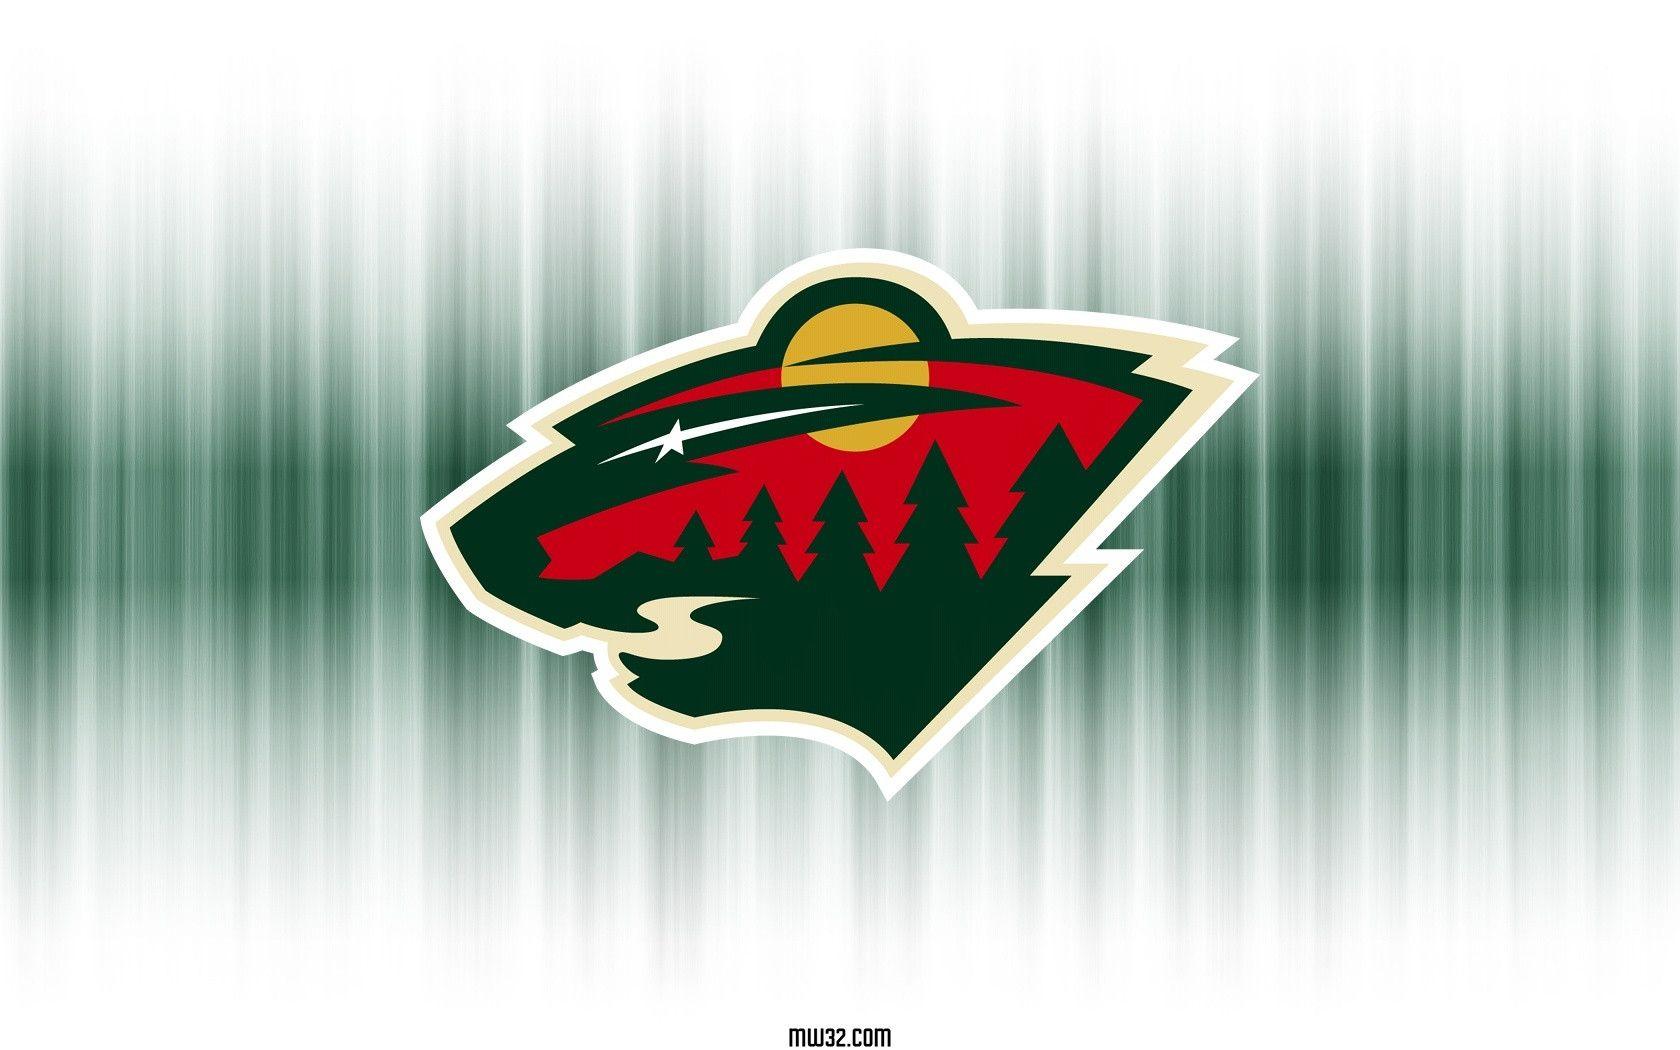 Minnesota Wild Wallpaper Picture 25704 Image. largepict